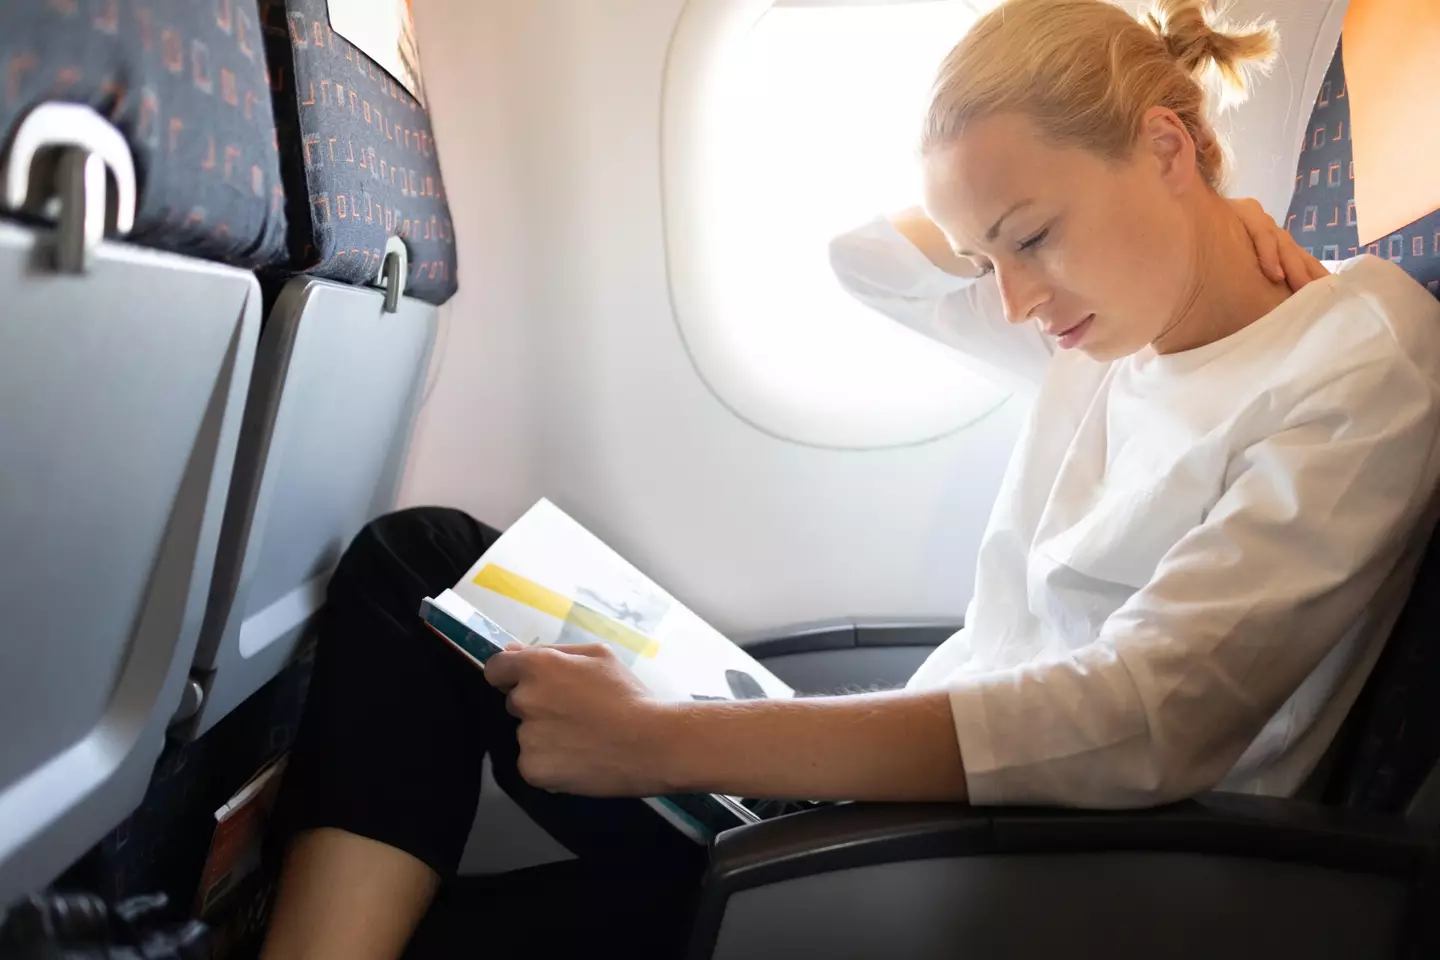 According to one expert, you should never wear leggings on a flight for safety reasons.